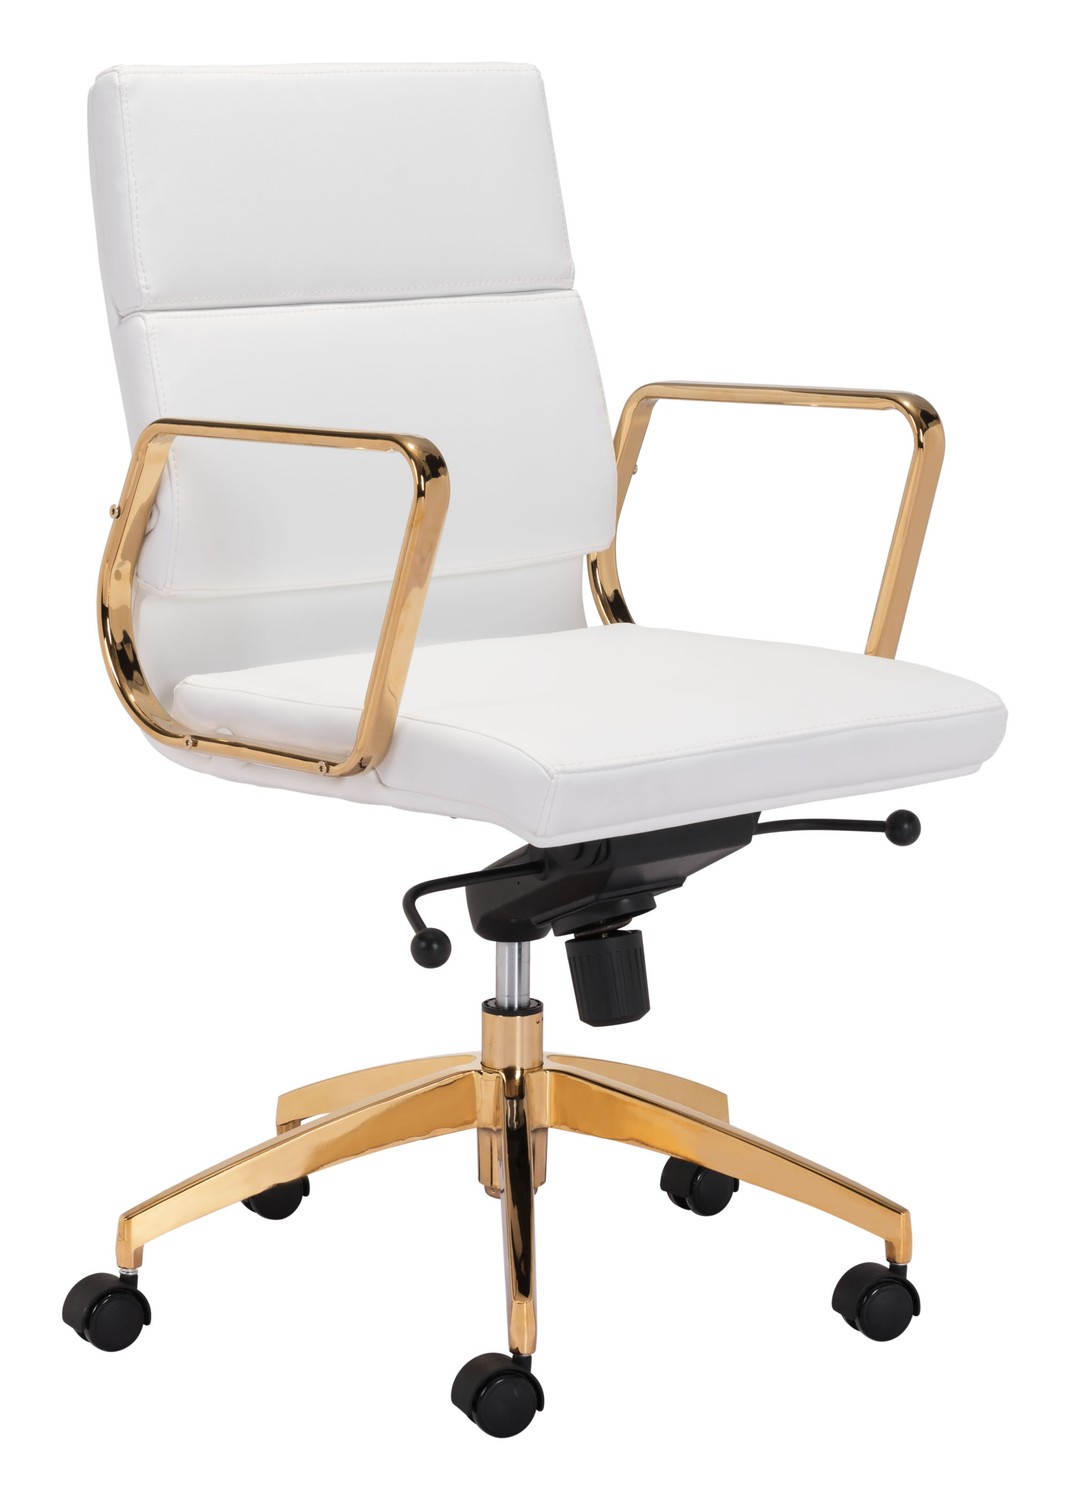 24" x 24" x 37.4" White & Gold, Leatherette, Brass-plated Steel, Low Back Office Chair